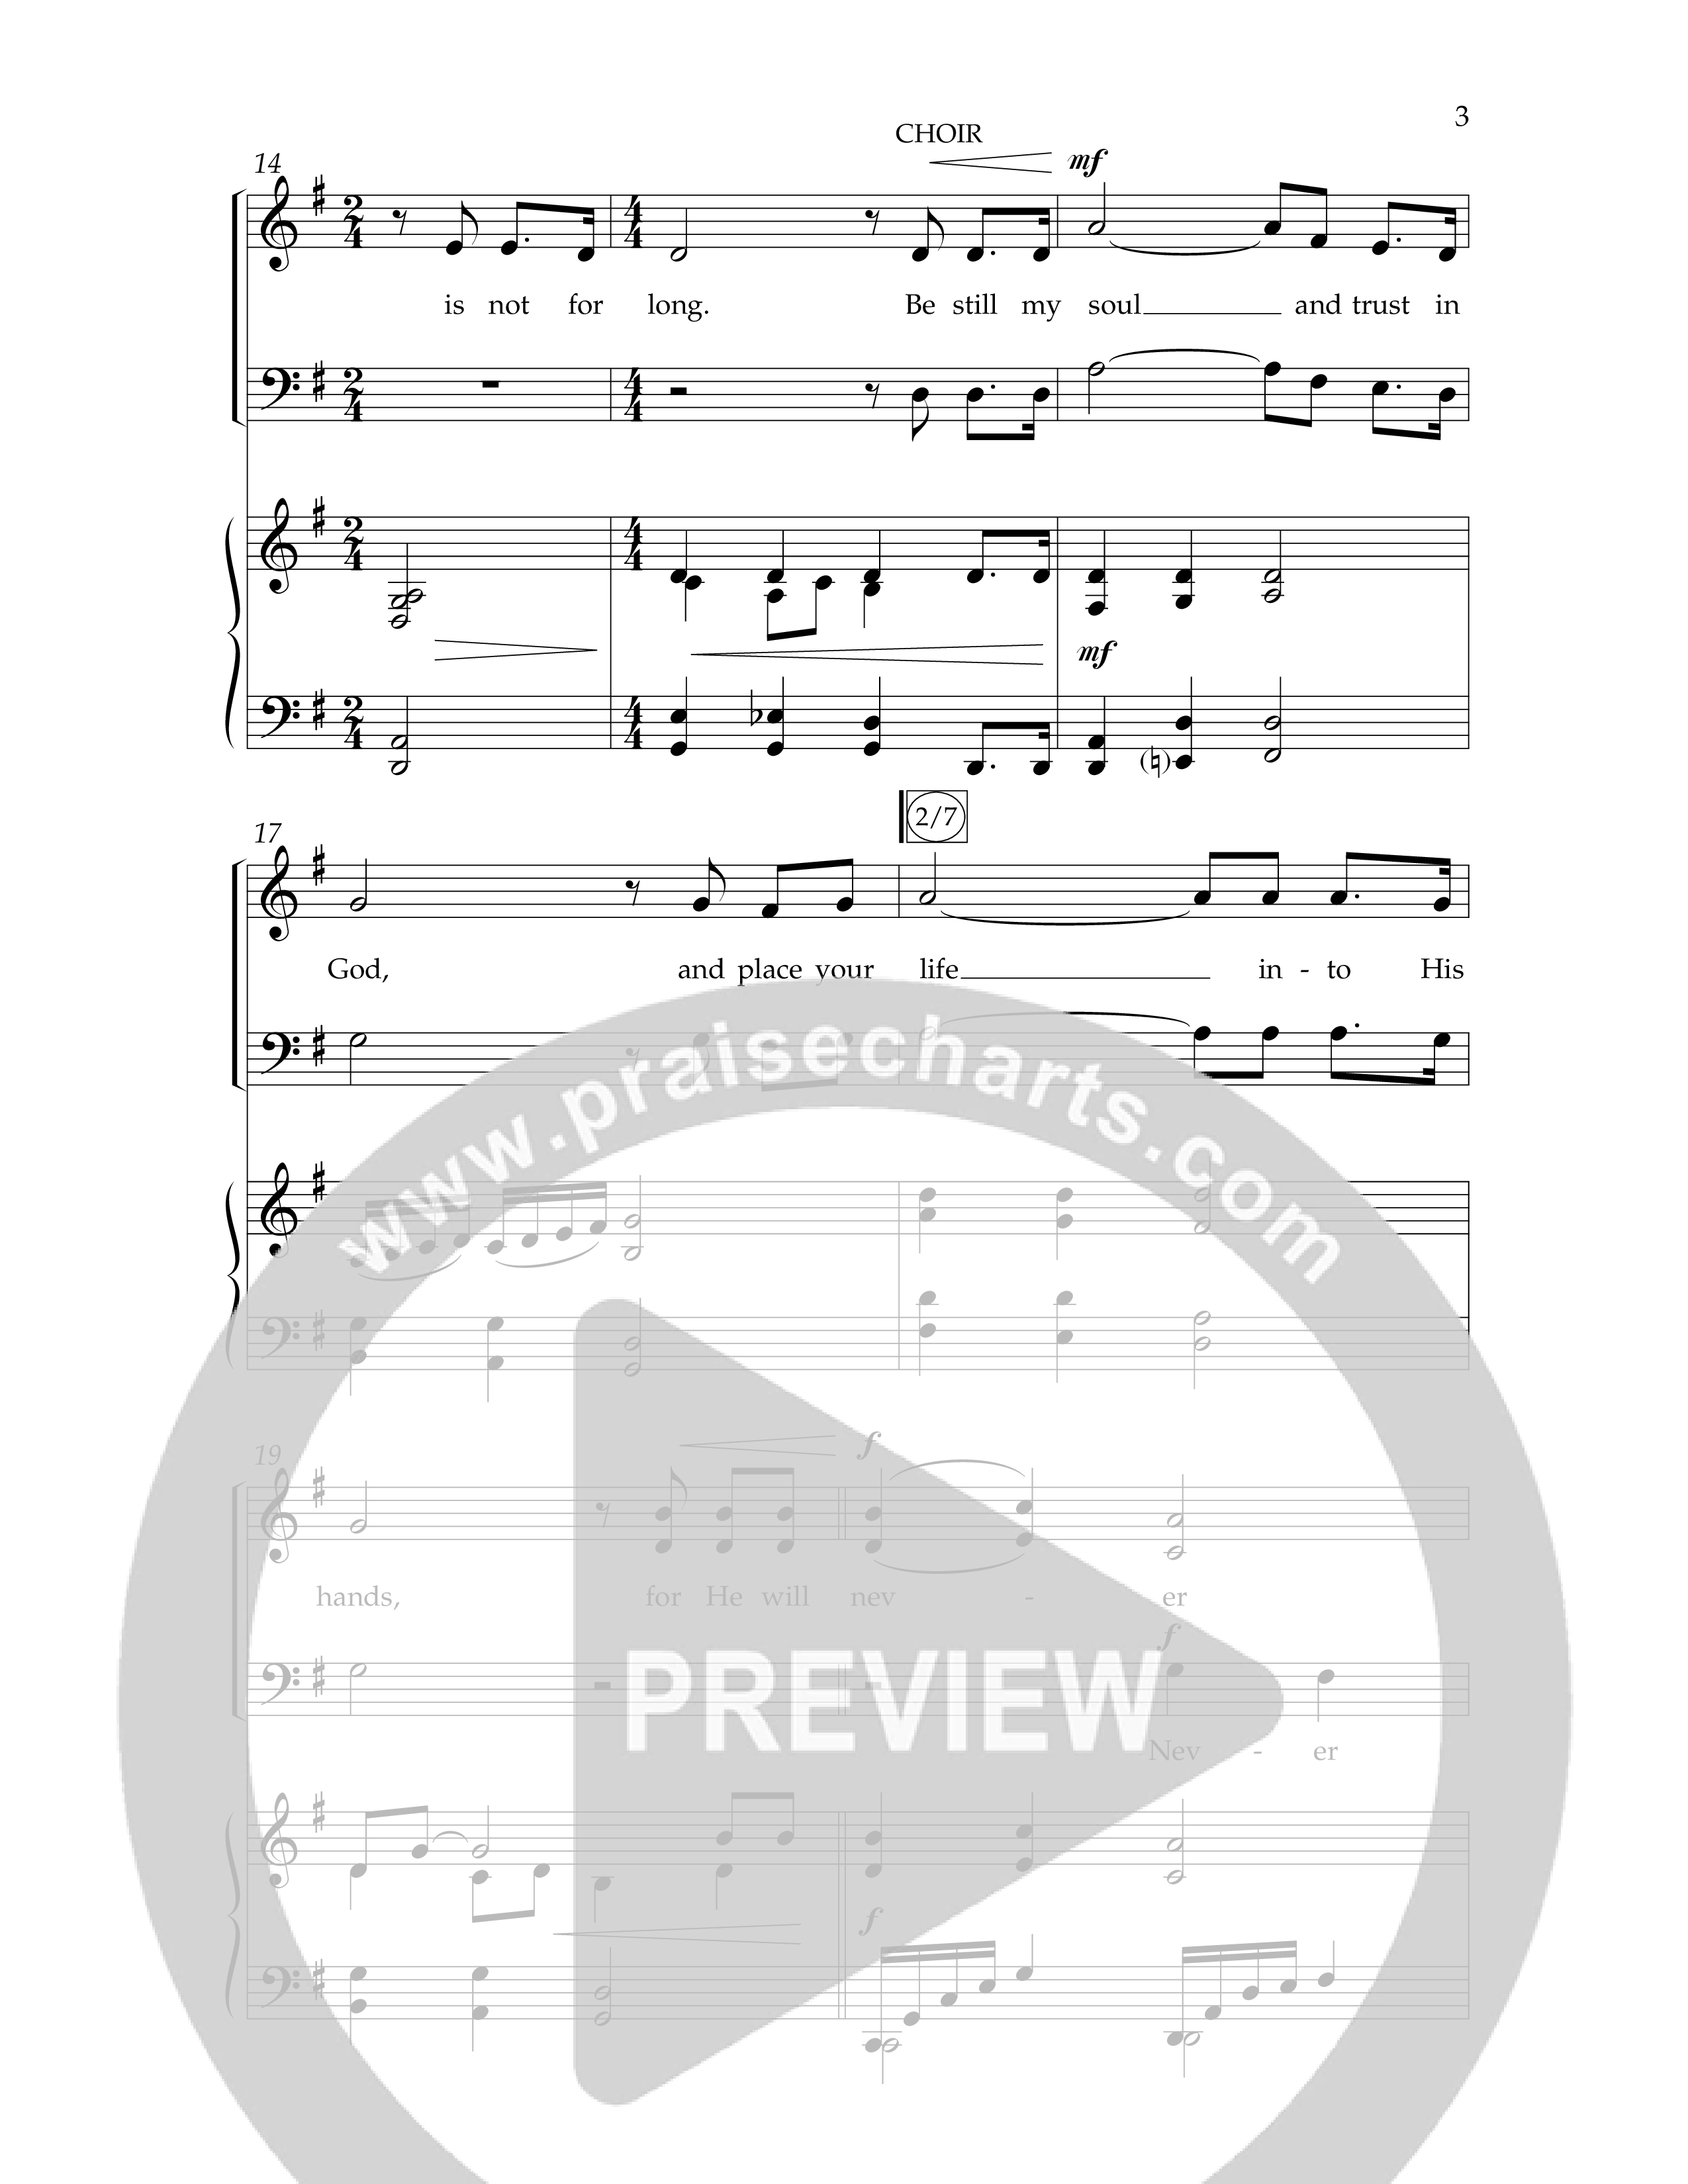 No Need To Fear (Choral Anthem SATB) Anthem (SATB/Piano) (Lifeway Choral / Arr. Danny Mitchell)